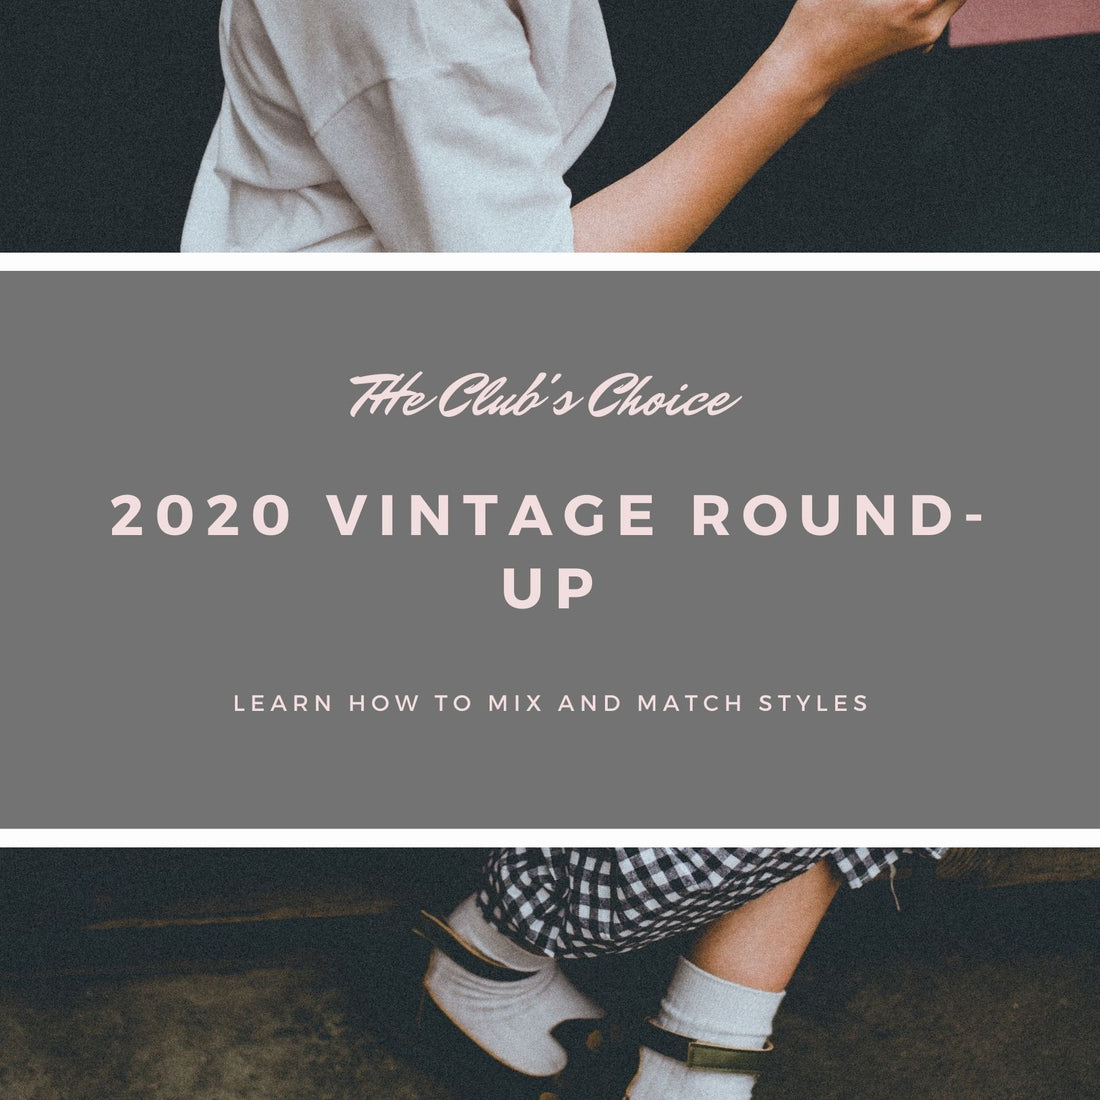 The Club's Choice: Truely Vintage finds